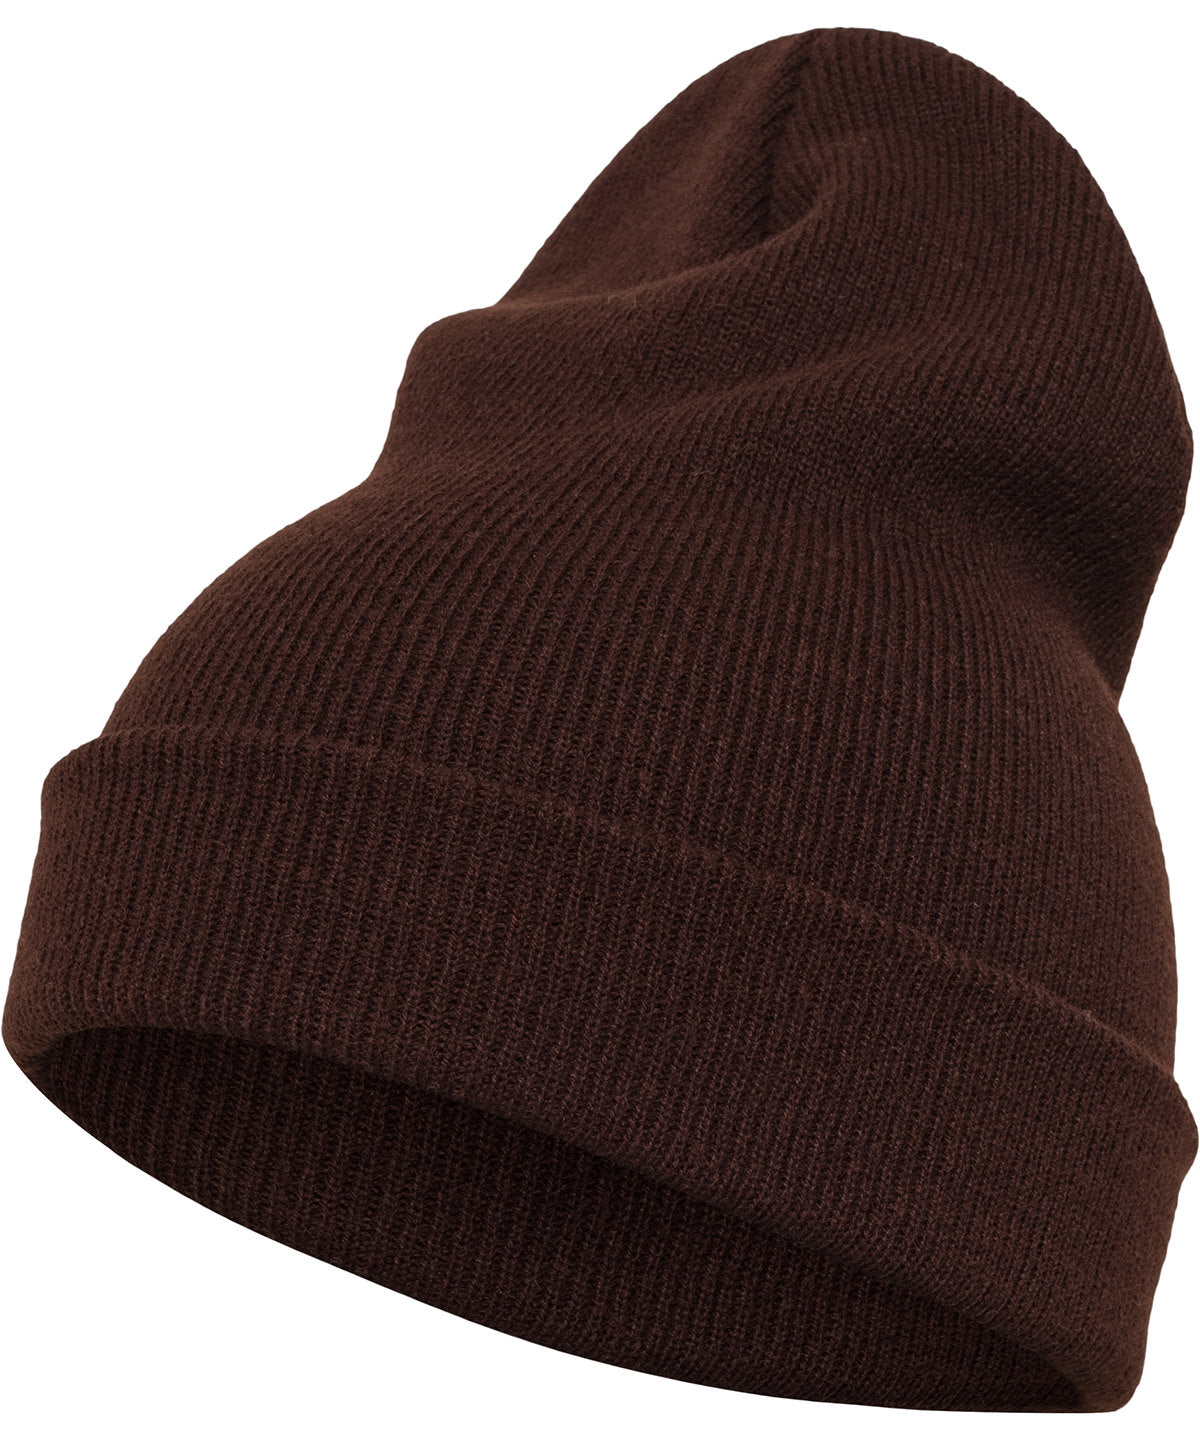 Brown - Heavyweight long beanie (1501KC) Hats Flexfit by Yupoong Headwear, Must Haves, New Colours for 2023, Winter Essentials Schoolwear Centres